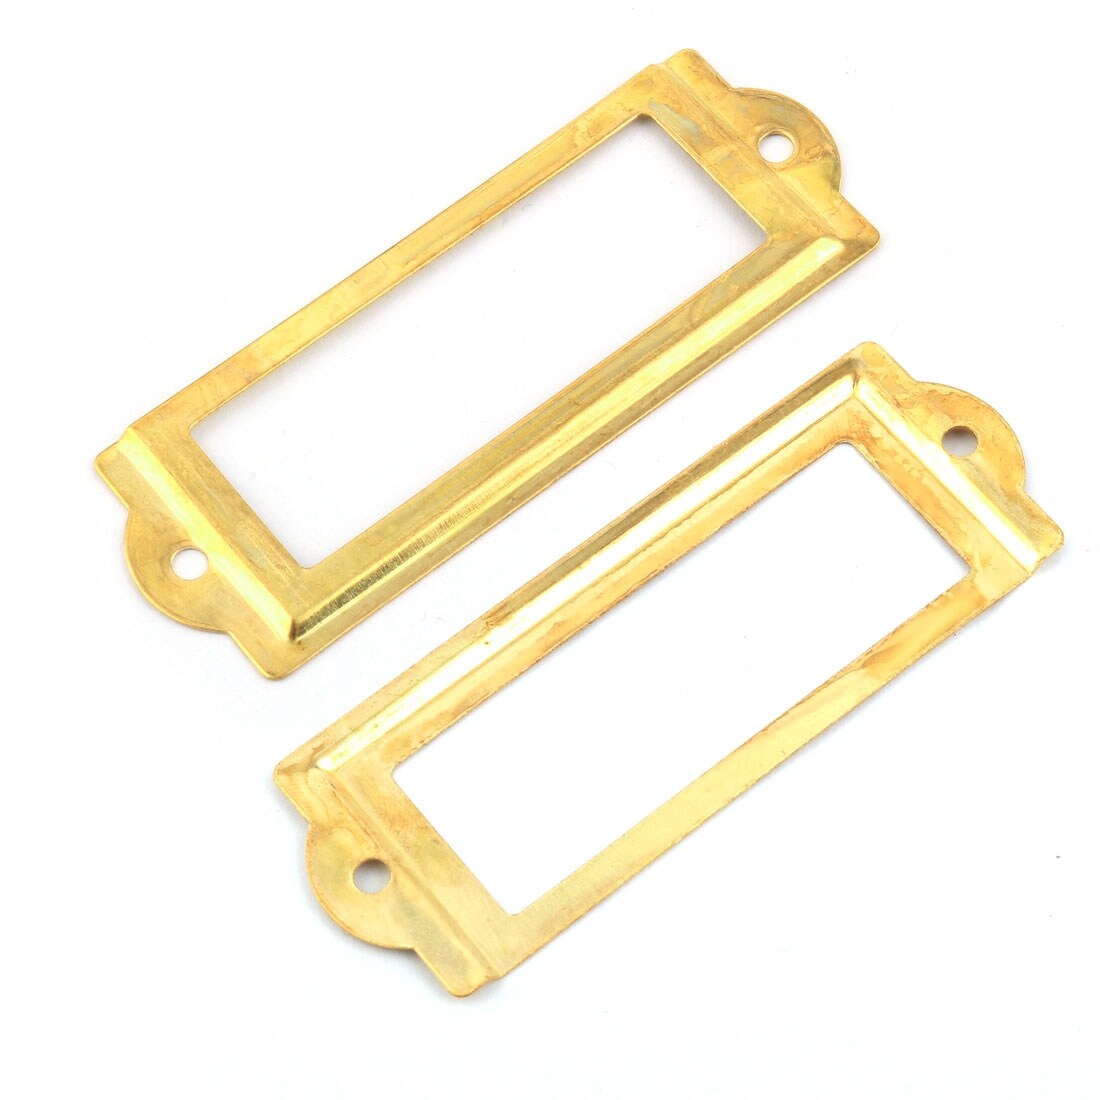 Library Drawer Cabinet Box Tag Label Card Frame Holder 83 x 30mm 30pcs - Gold Tone - 3.3" x 1.2"(L*W)